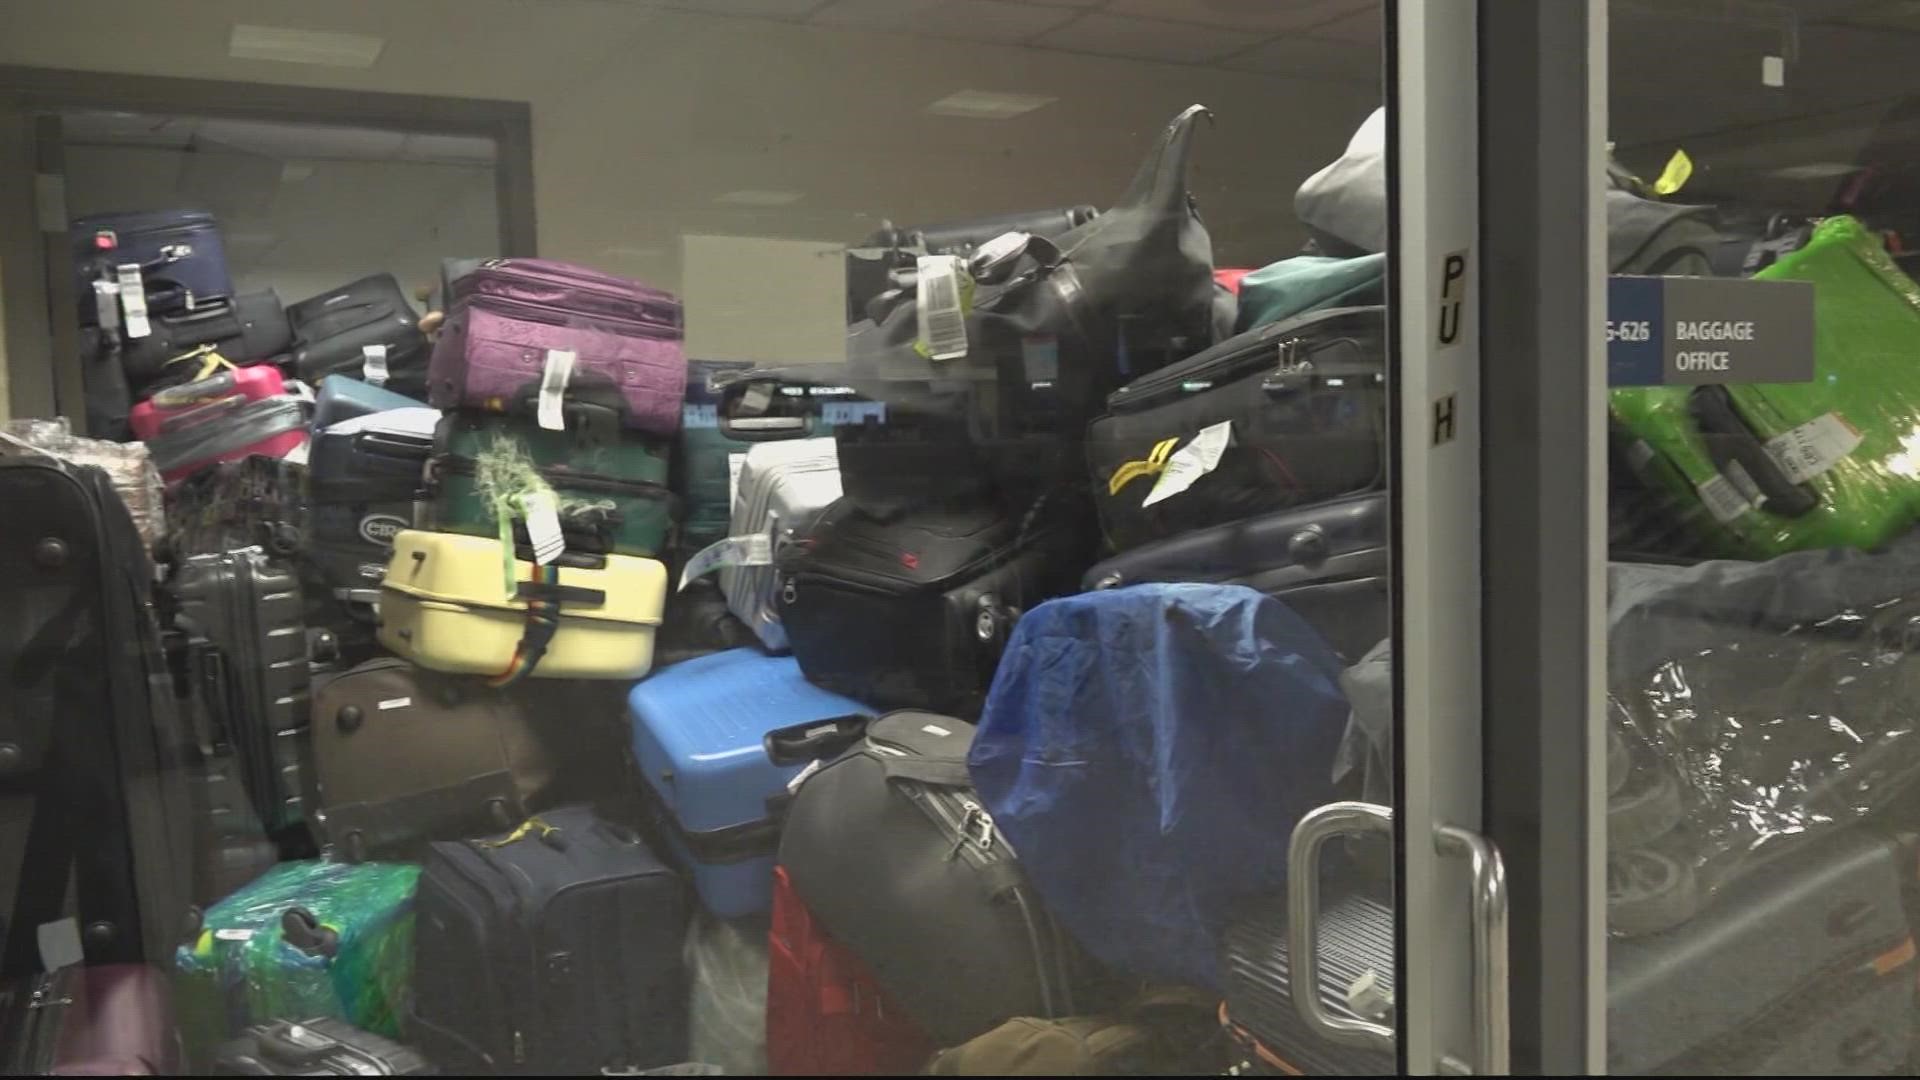 Some passengers claim the airline won't even let them in the room to check if a bag is theirs.